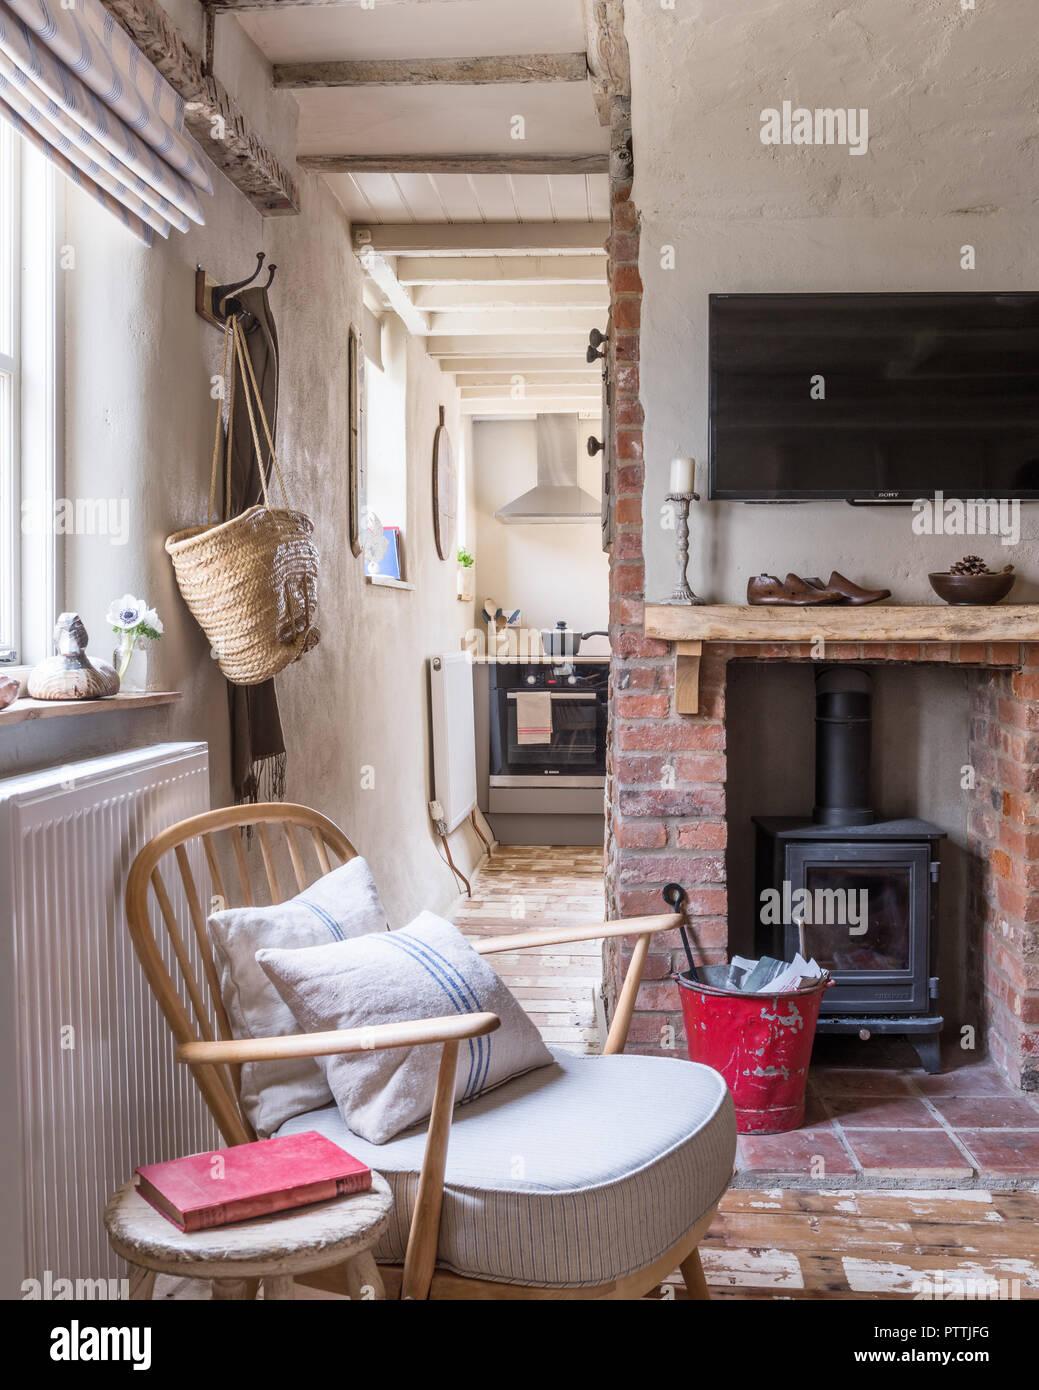 Stripped Ercol-style armchair and woodburner in exposed brick fireplace Stock Photo